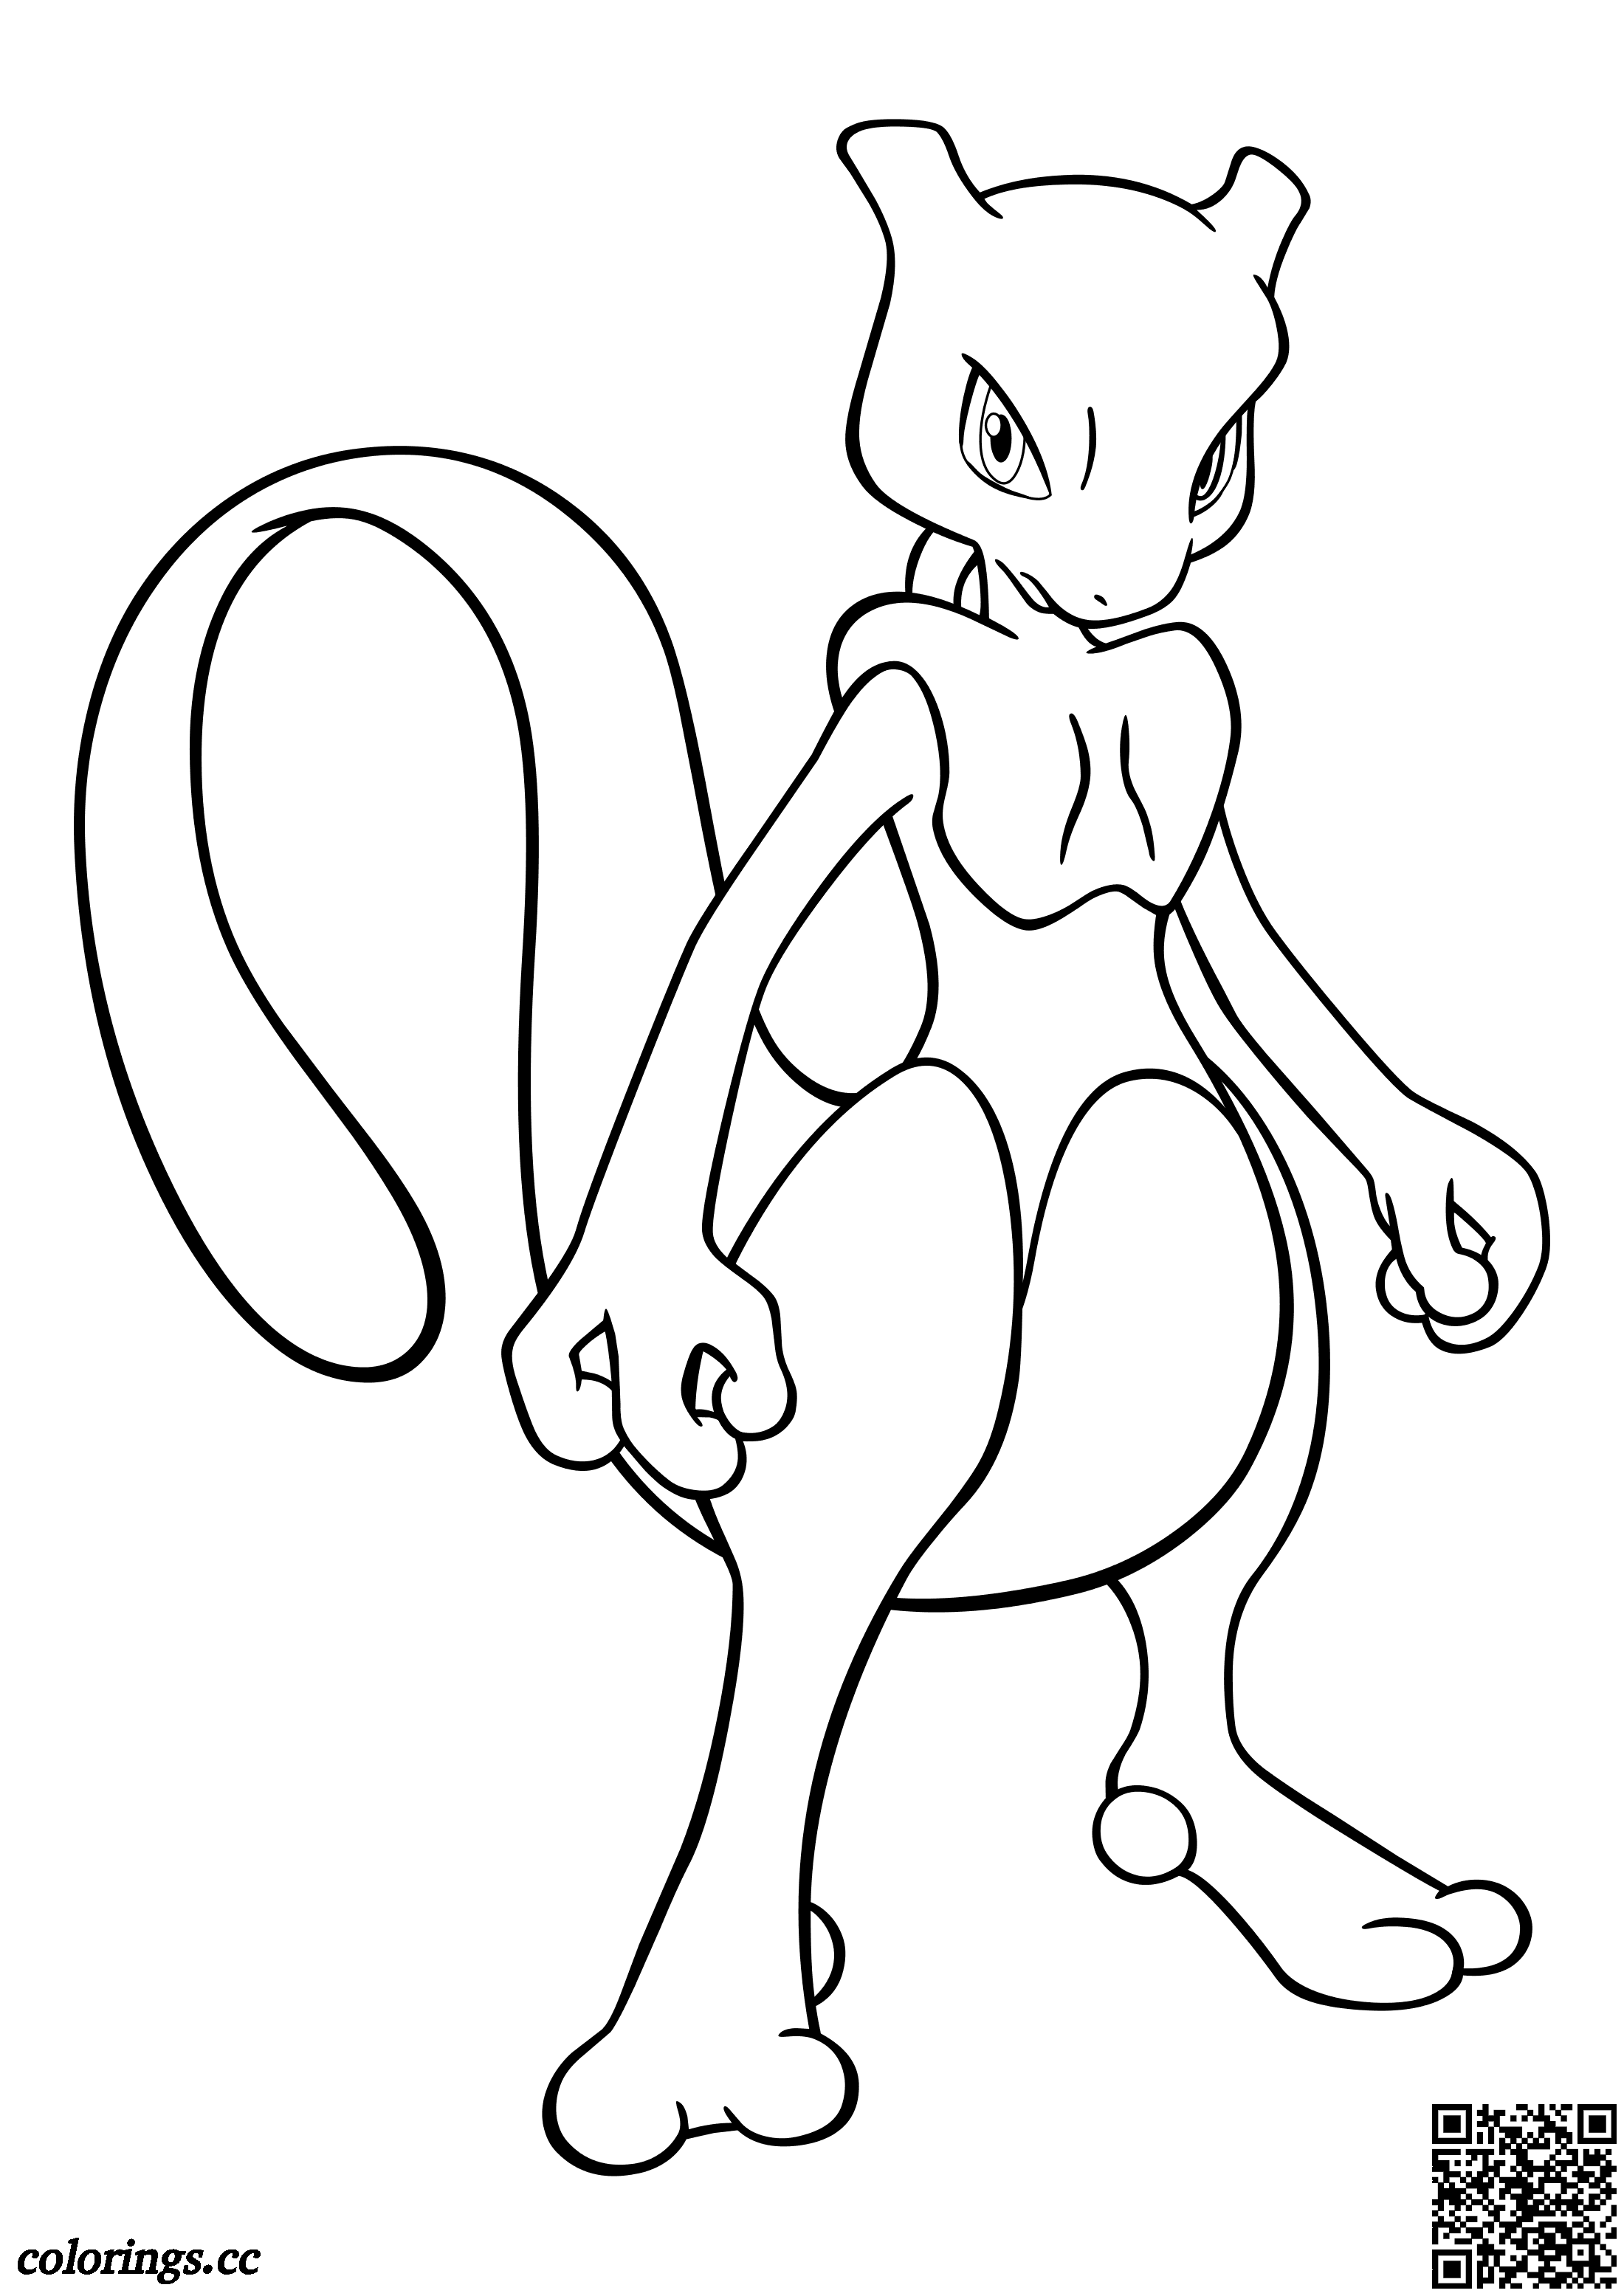 150 - Mewtwo coloring pages, Pokemon coloring pages 